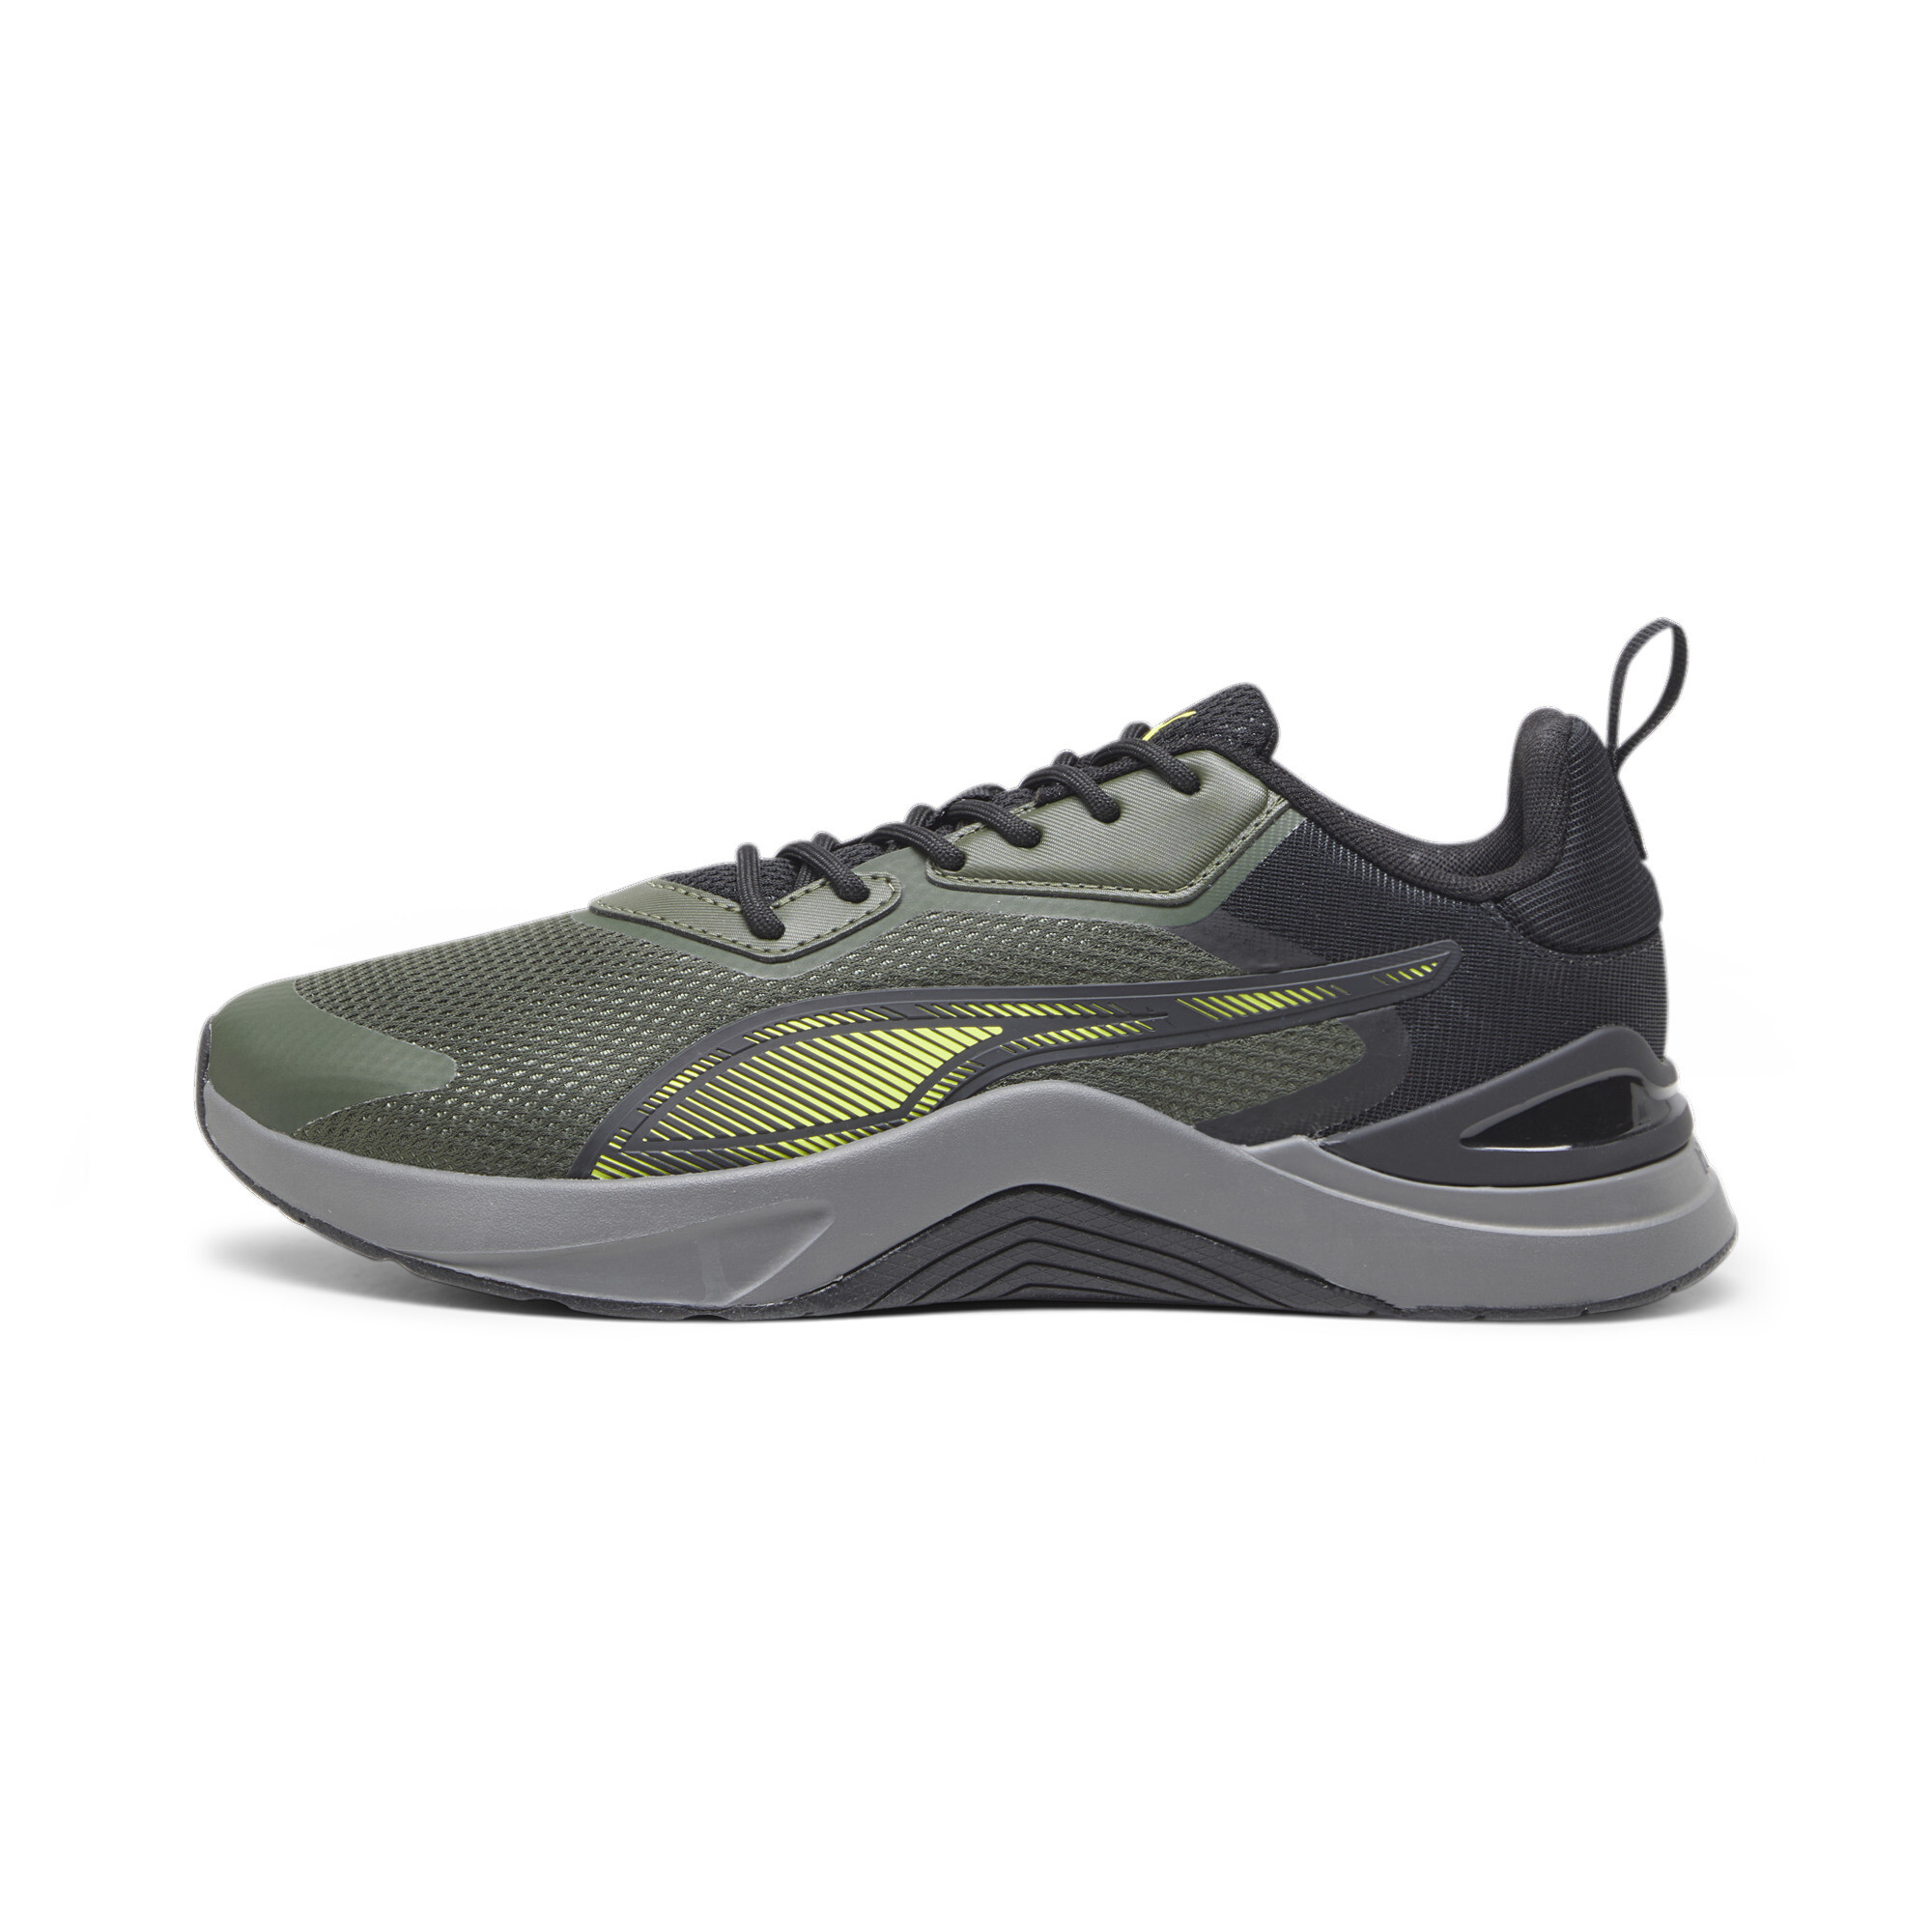 Men's Puma Infusion Training Shoes, Green, Size 38, Shoes